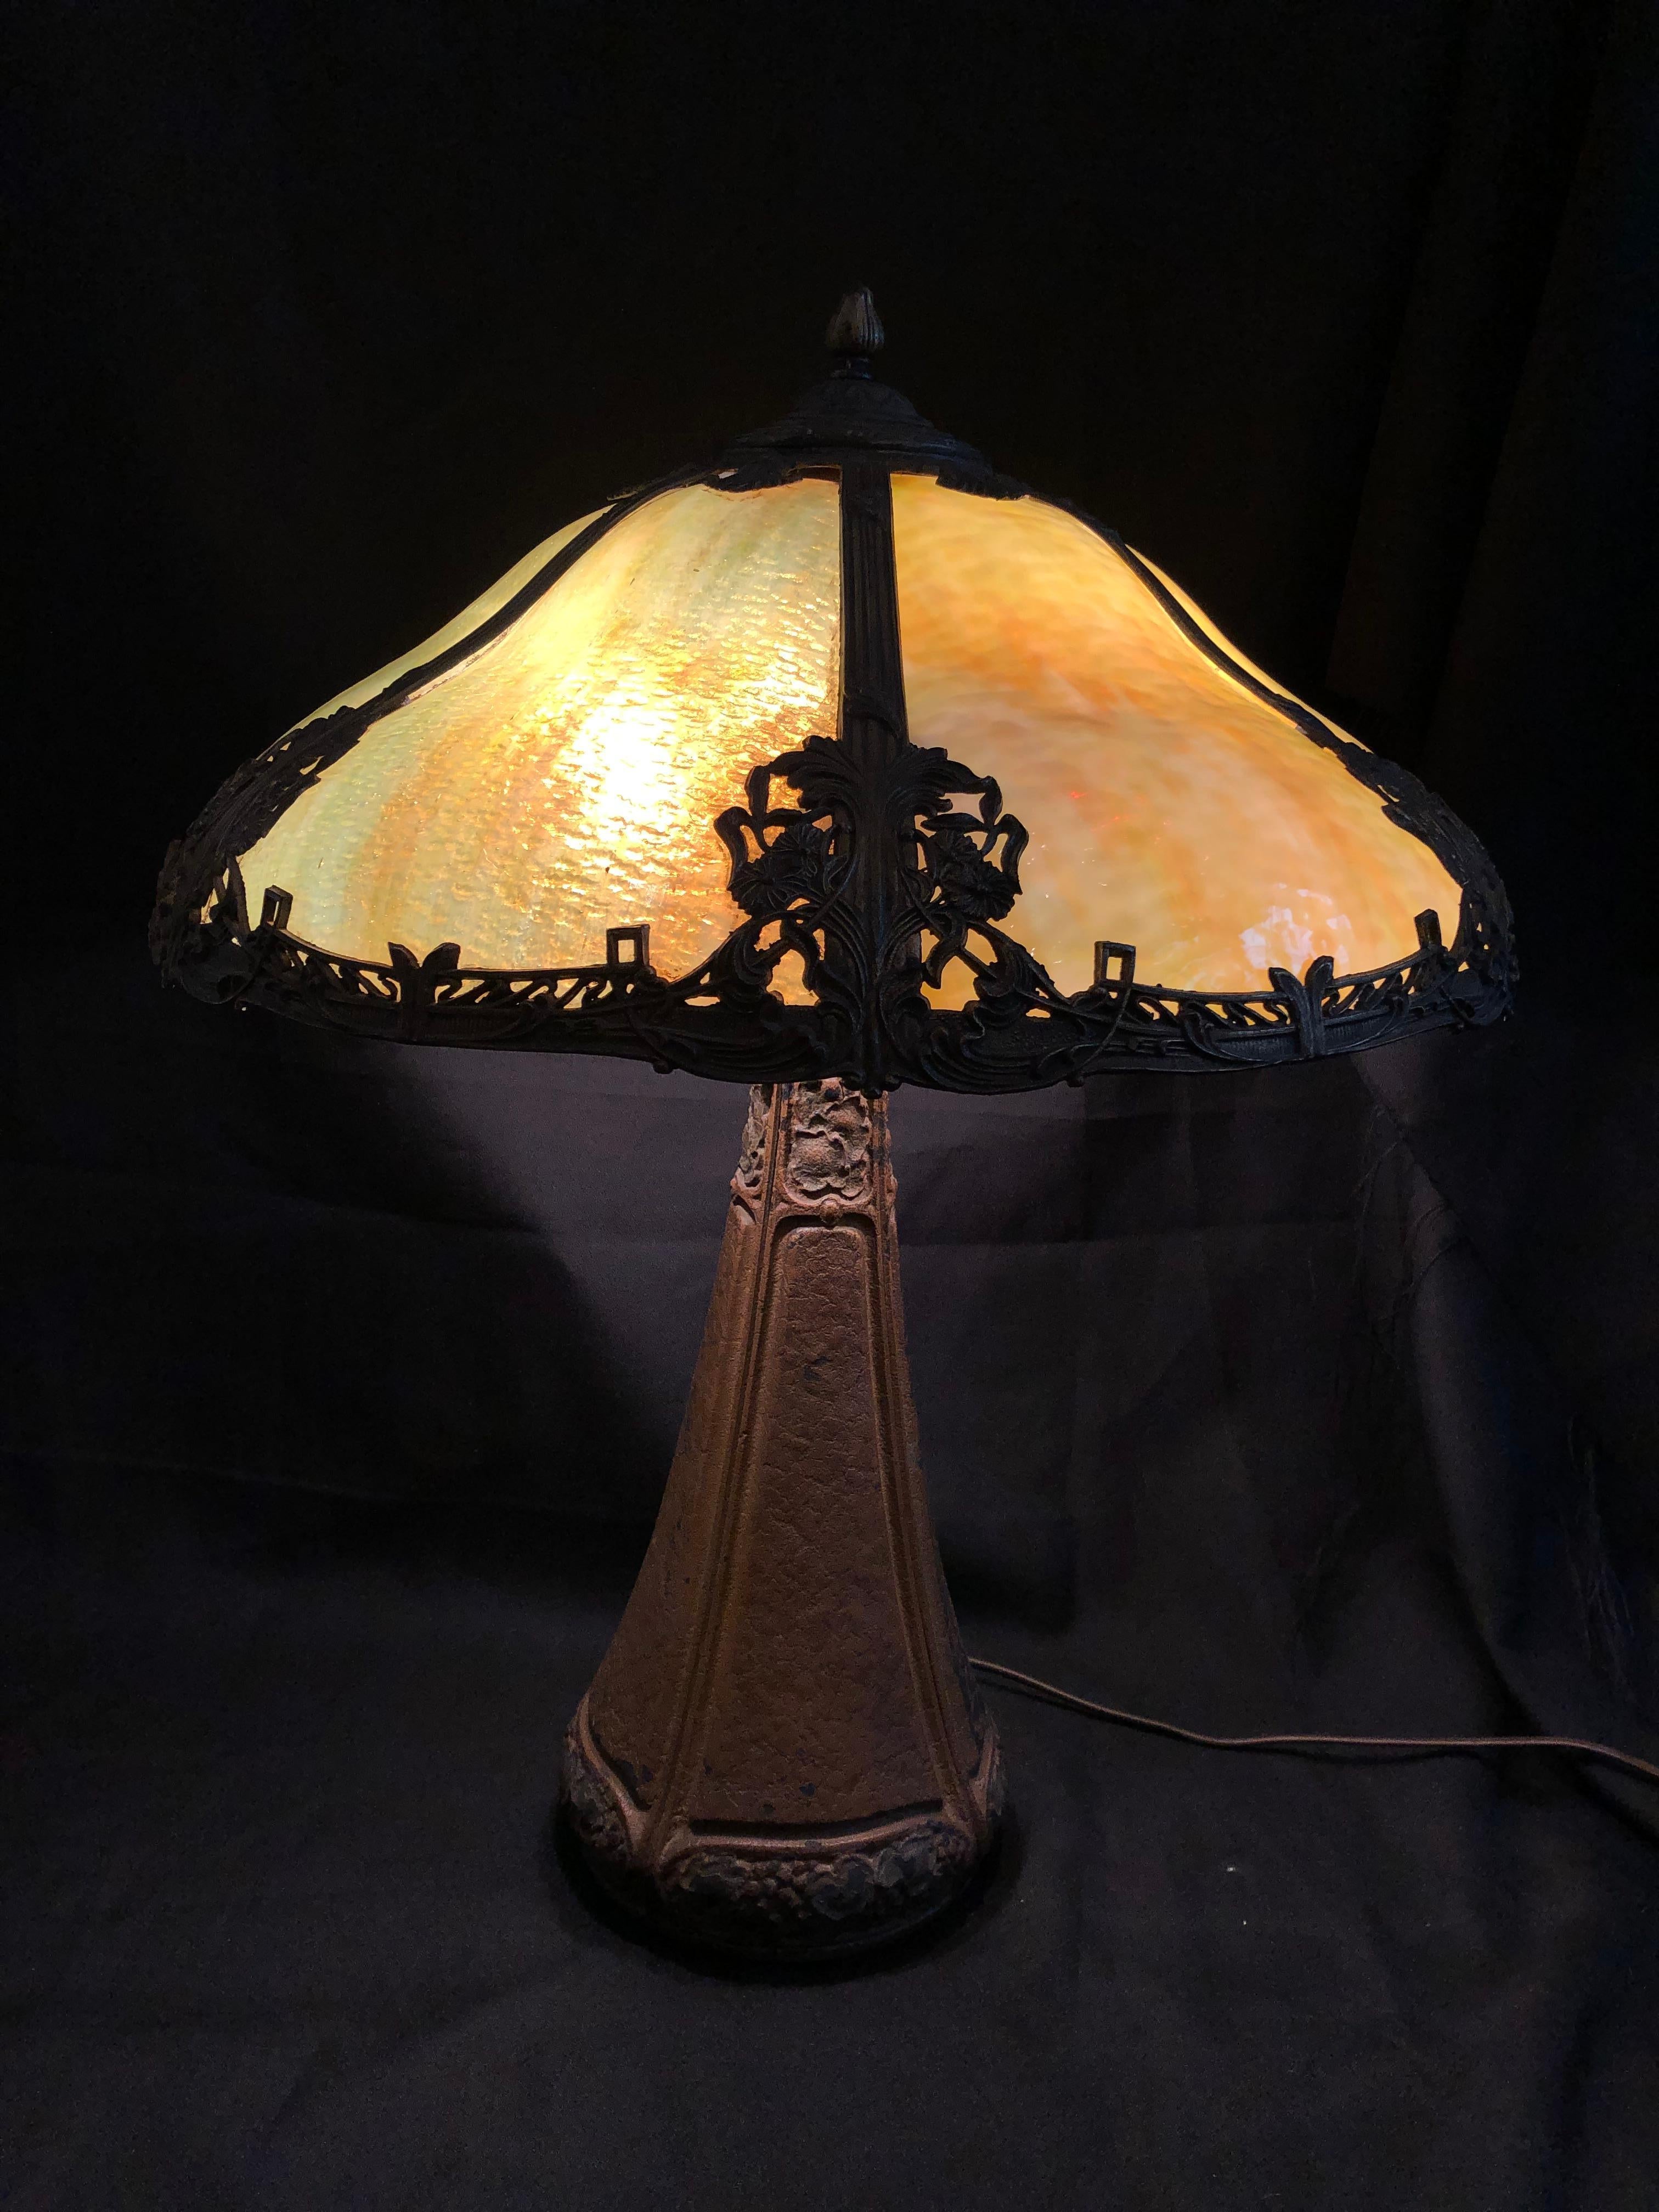 A handsome Bradley & Hubbard cast iron lamp with original finish, aged to an appealing patinated crackle. 

Soft green/ cream slag glass shade. 

The base is signed at the top.